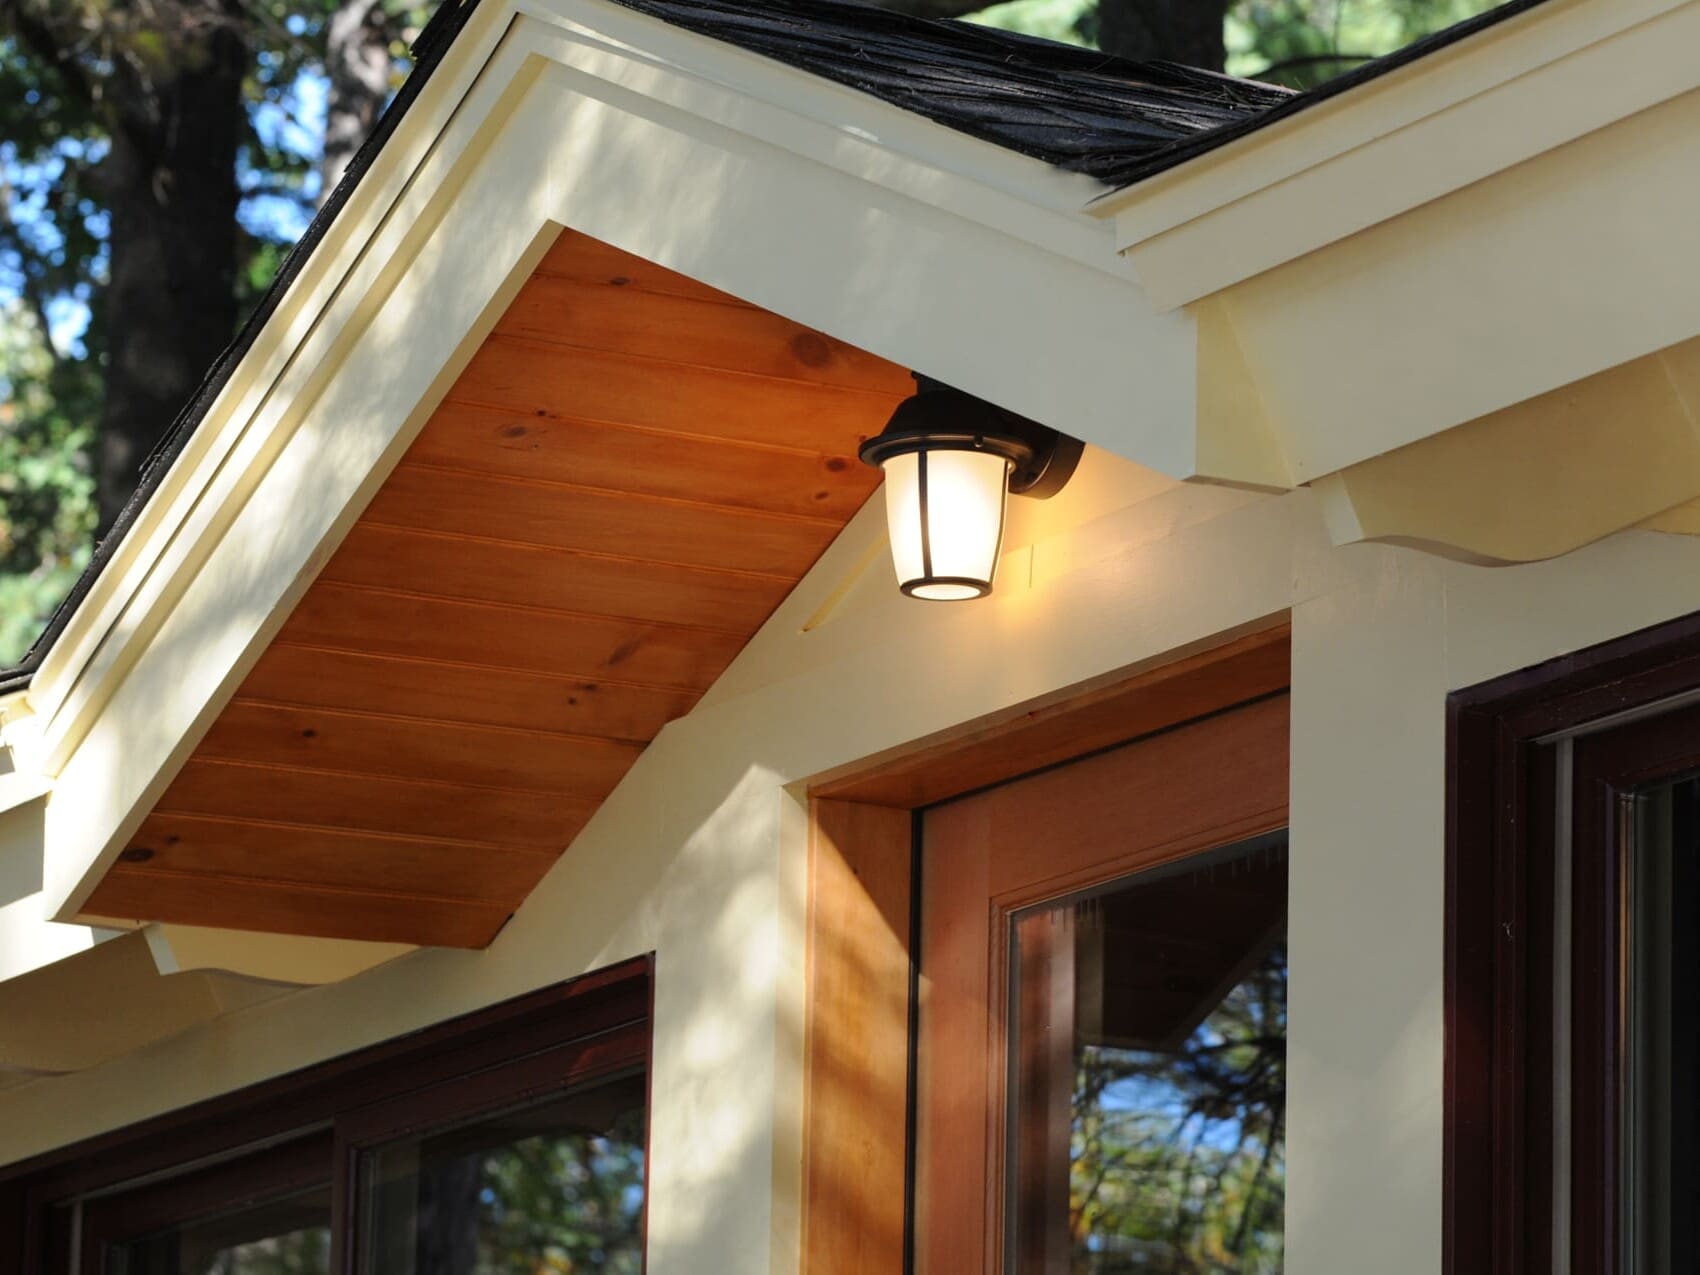 A photo of a doorway with a roof gable above it, housing a light fixture.